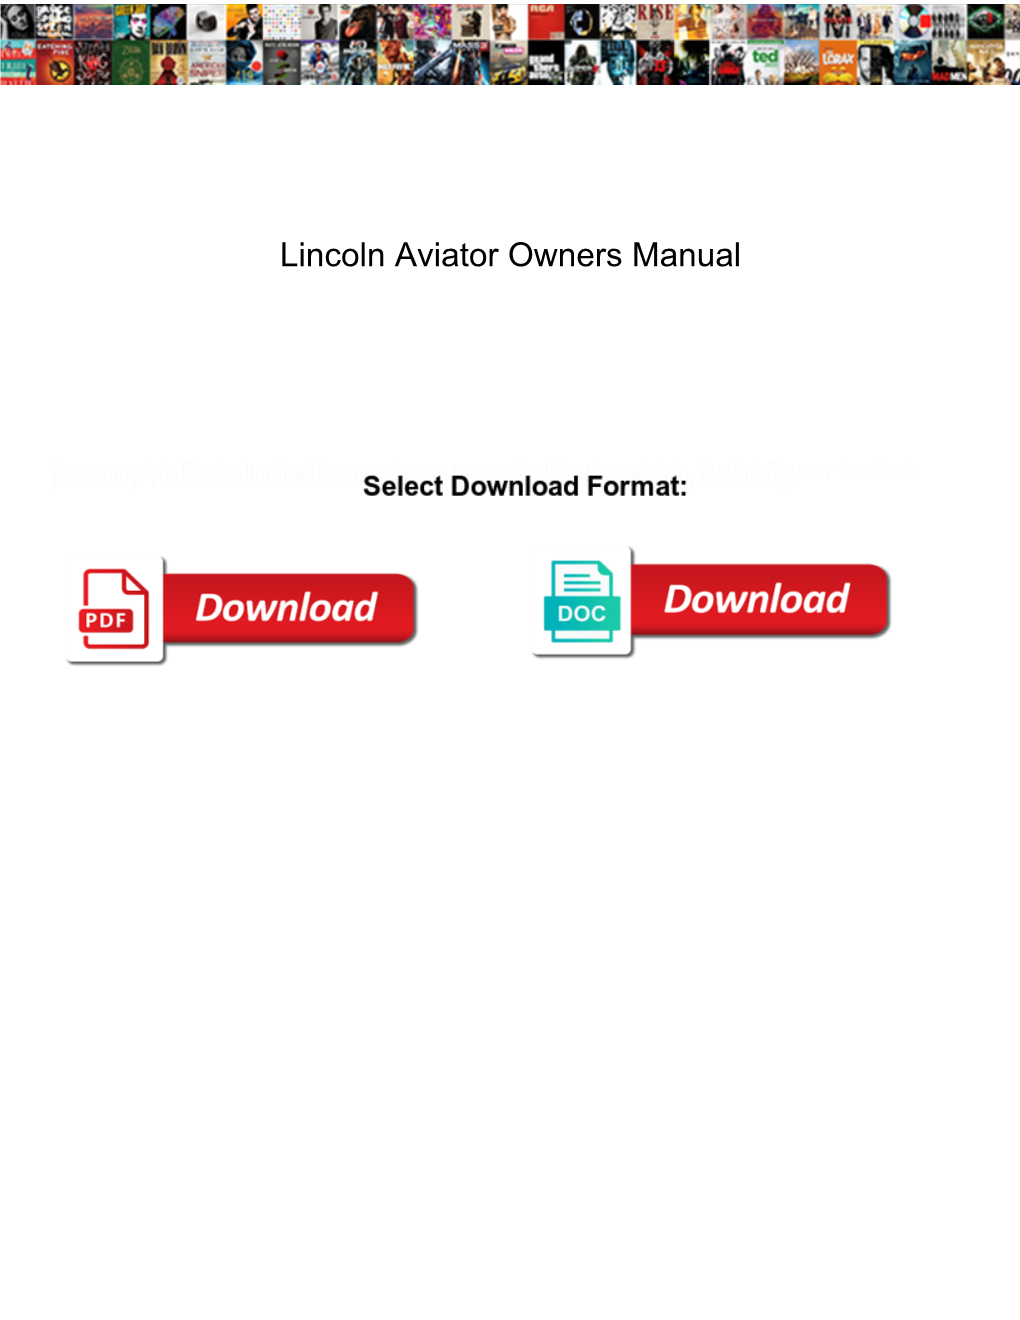 Lincoln Aviator Owners Manual